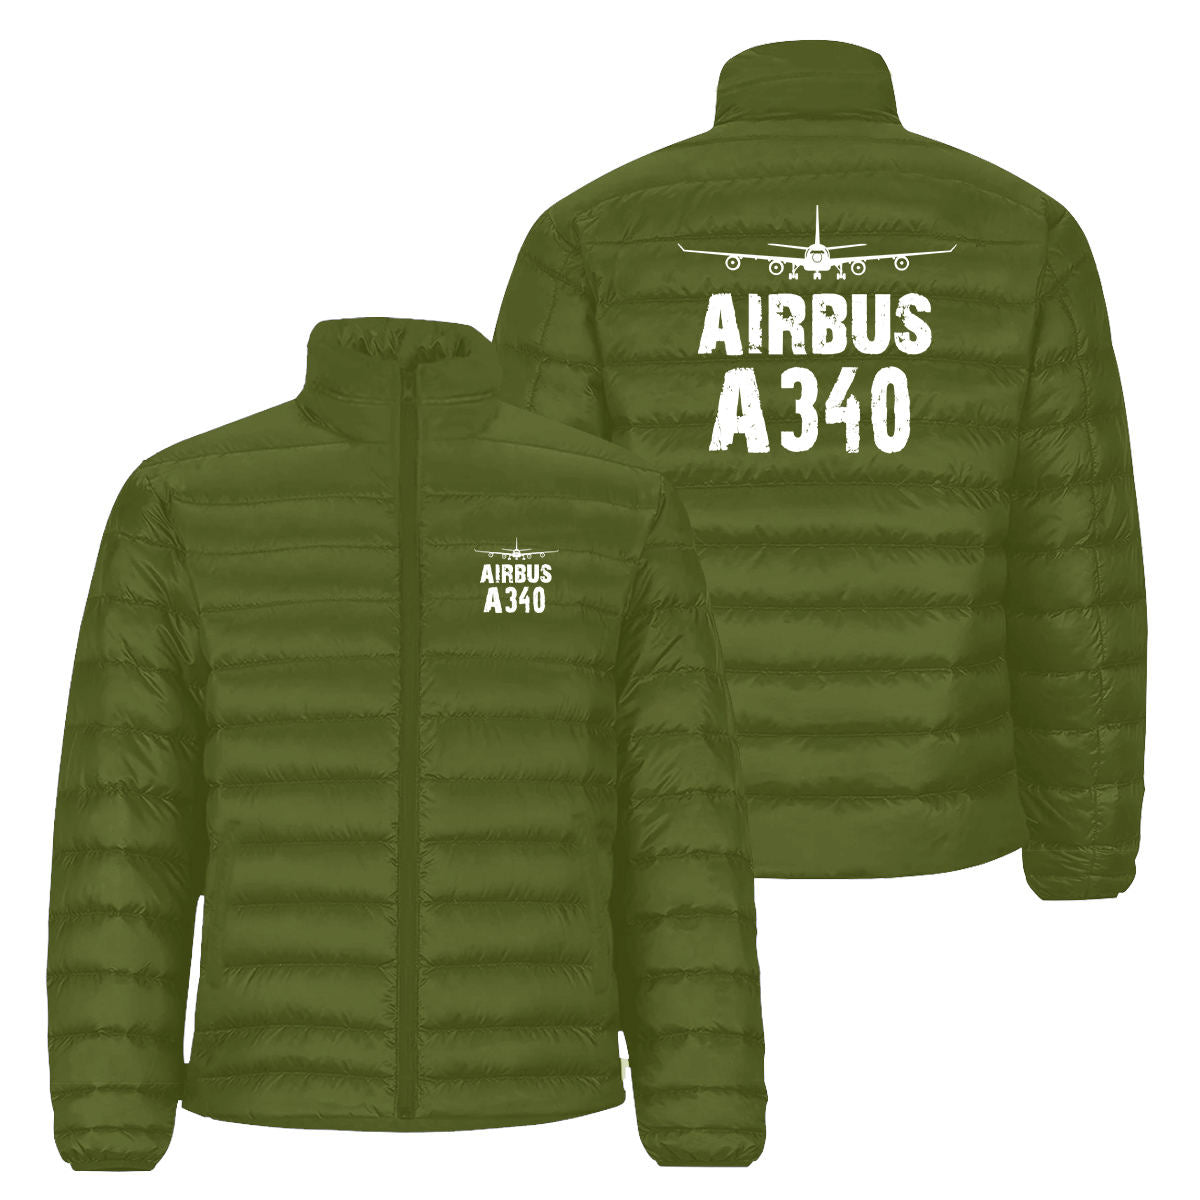 Airbus A340 & Plane Designed Padded Jackets